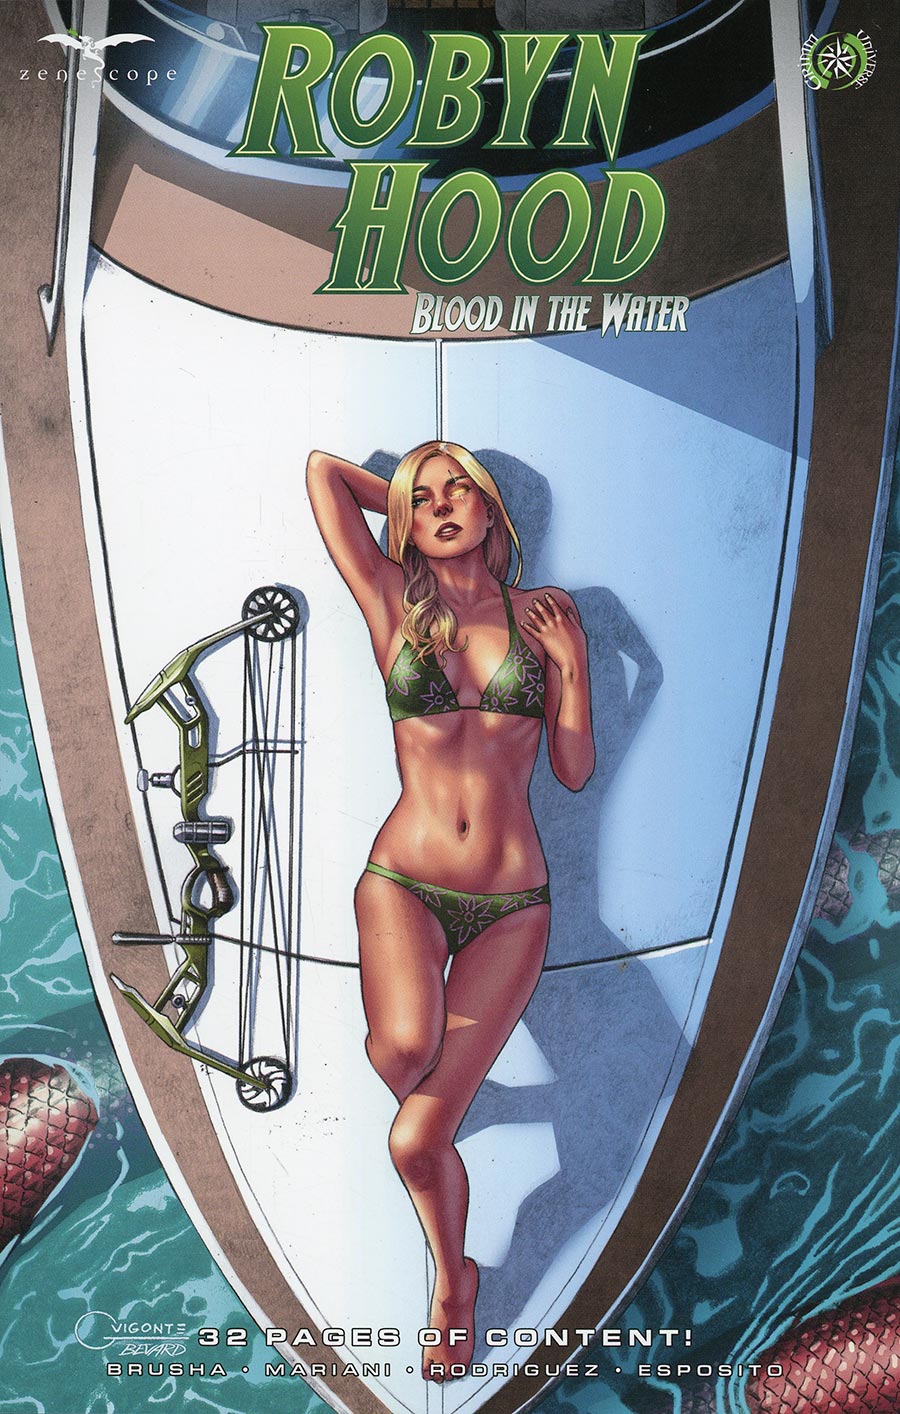 Grimm Fairy Tales Presents Robyn Hood Blood In The Water #1 (One Shot) Cover A Geebo Vigonte